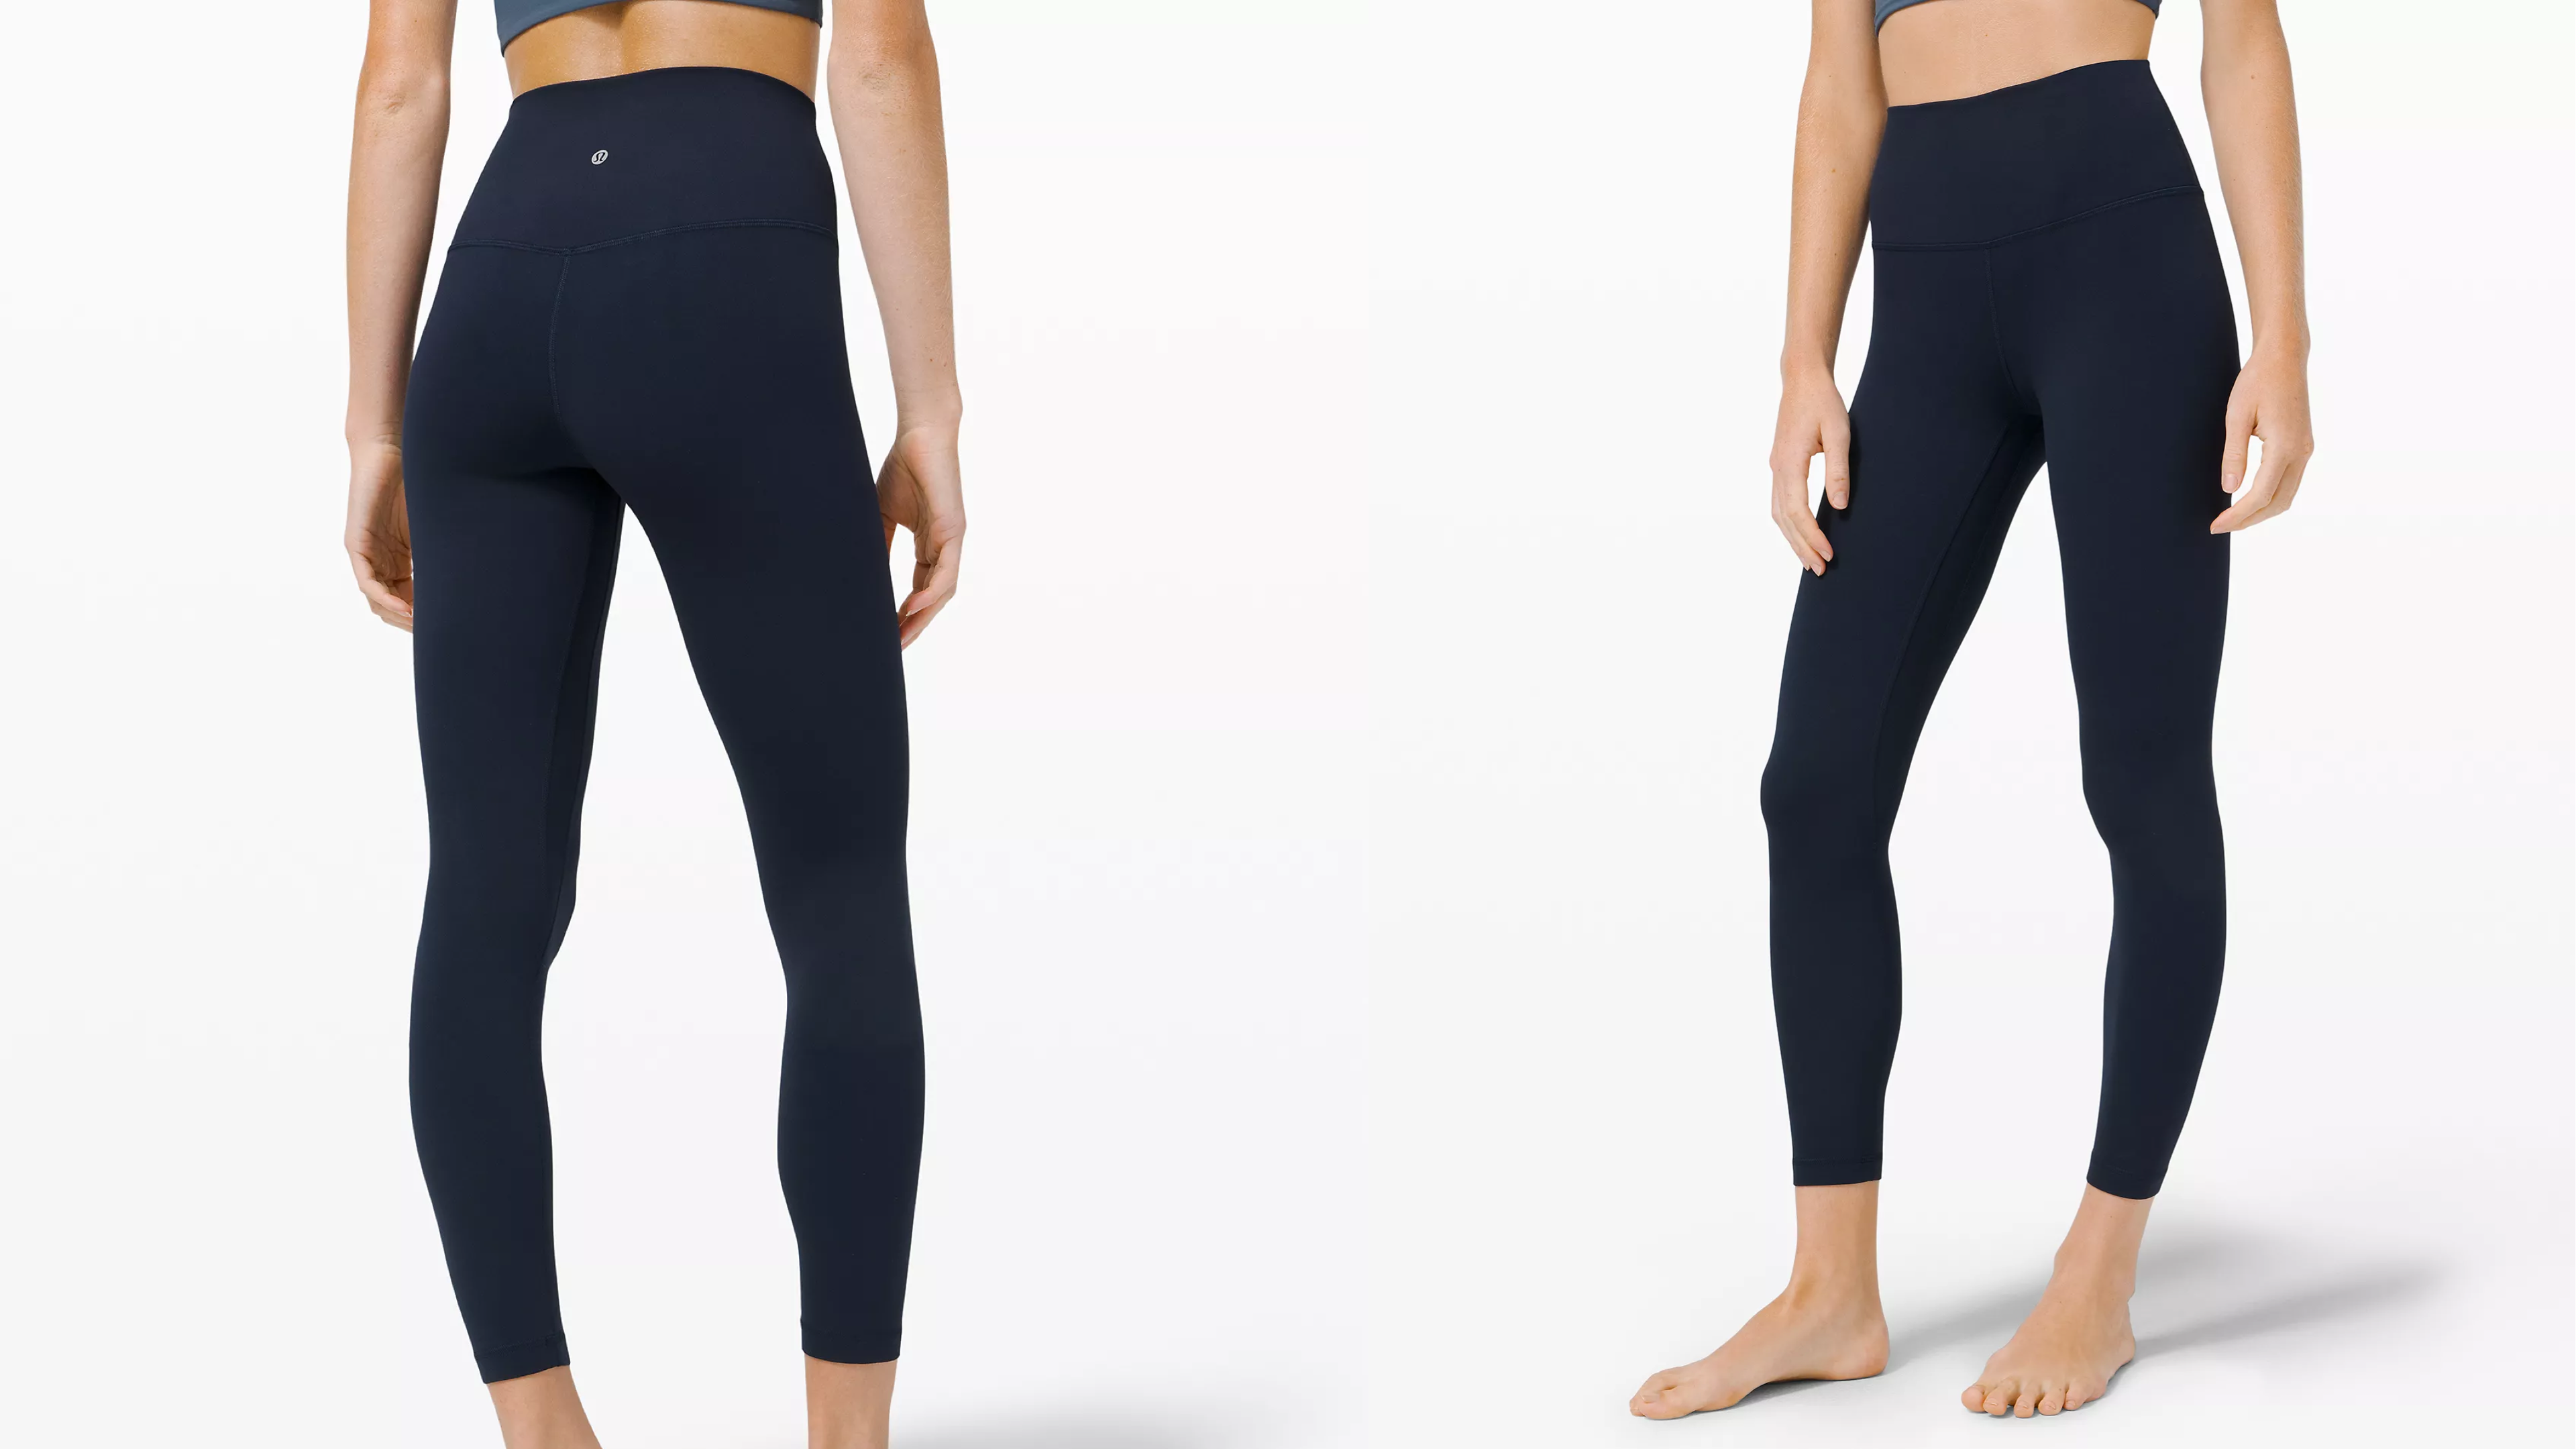 soft black leggings for exercise or just lounging around the house